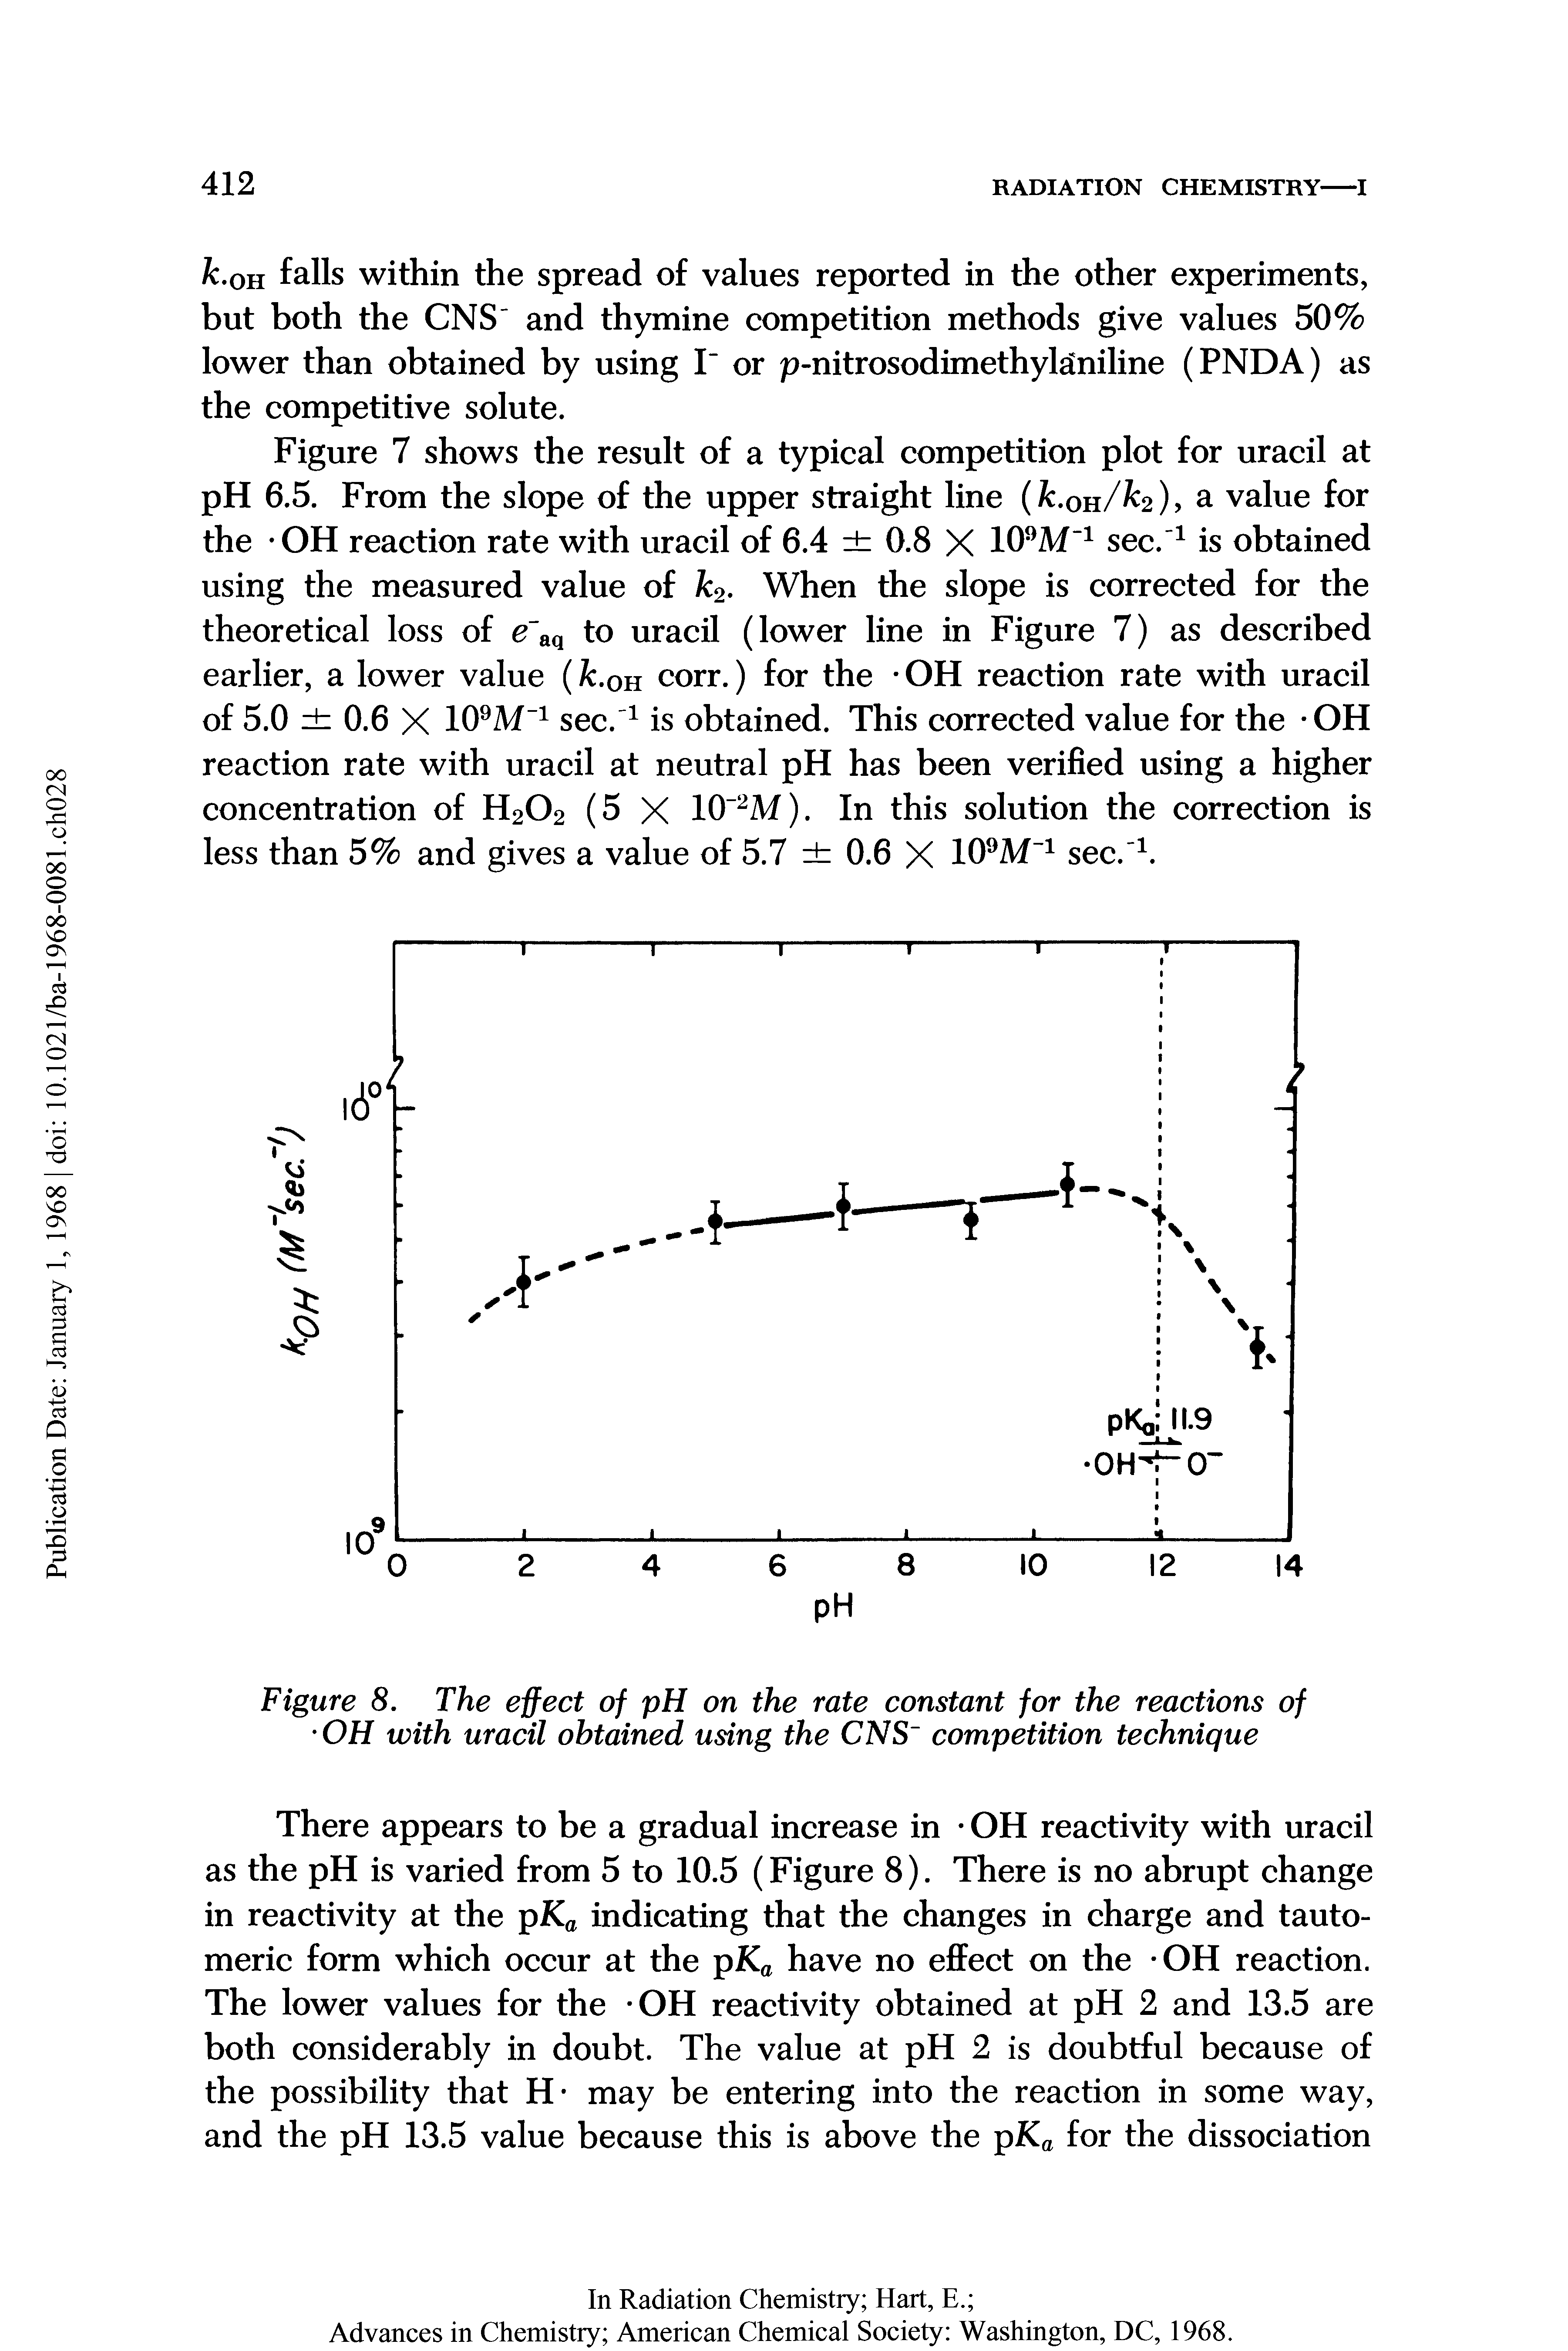 Figure 8. The effect of pH on the rate constant for the reactions of OH with uracil obtained using the CNS competition technique...